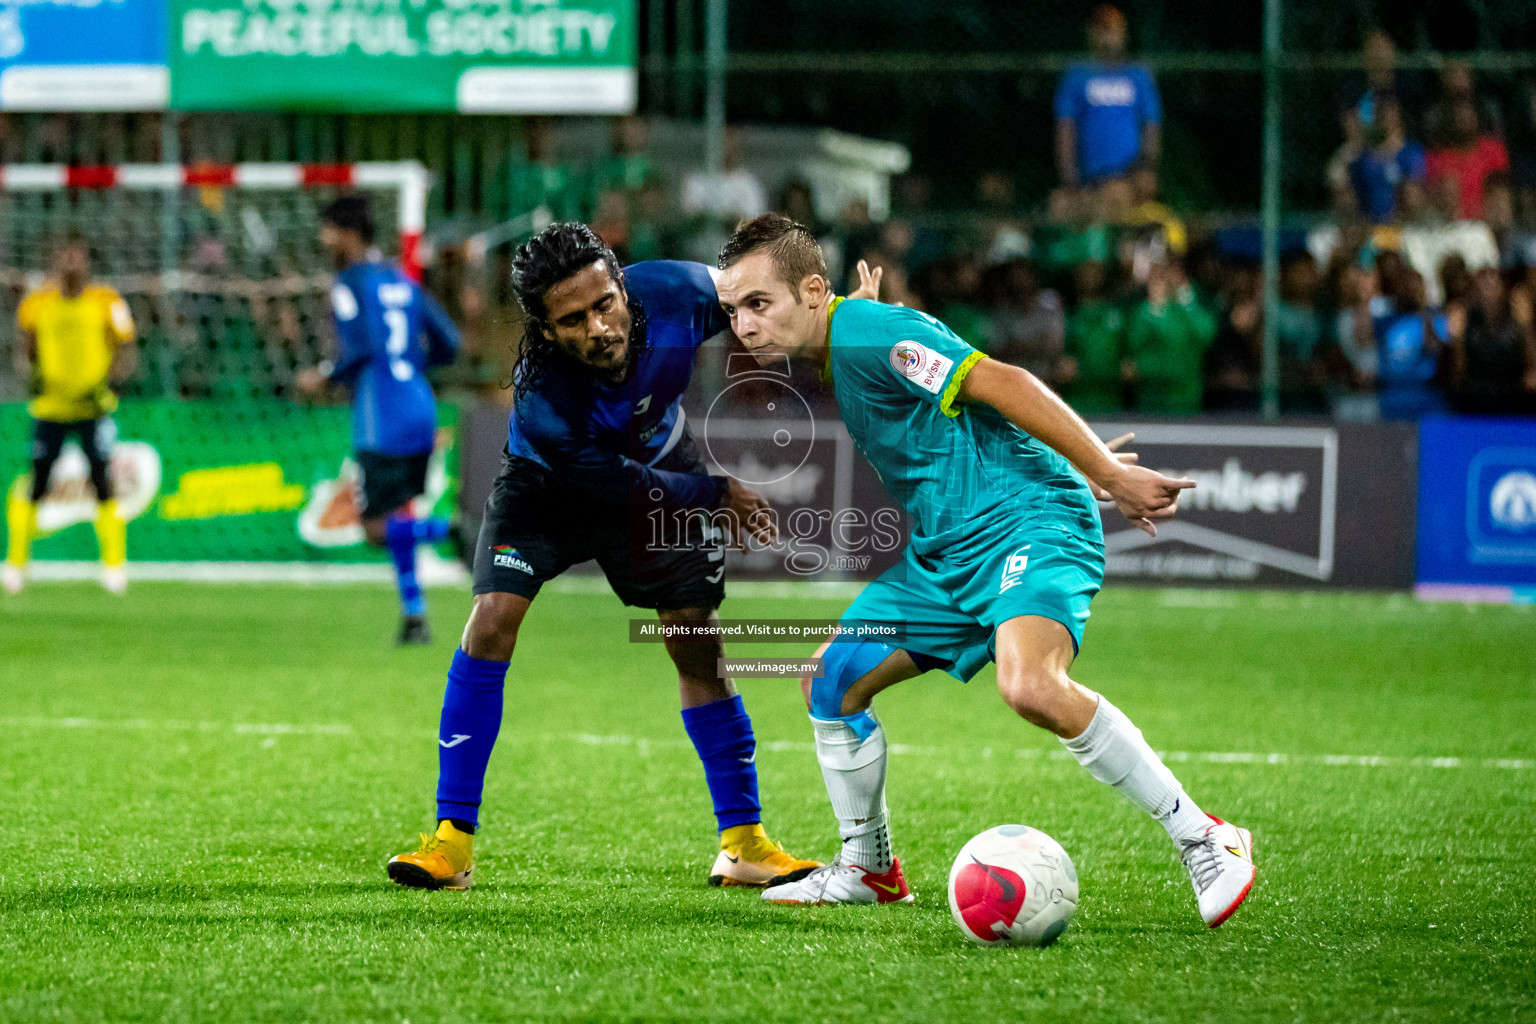 Team Fenaka vs Club WAMCO in Semi-finals of Club Maldives Cup 2022 was held in Hulhumale', Maldives on Sunday, 30th October 2022. Photos: Hassan Simah, Ismail Thoriq / images.mv